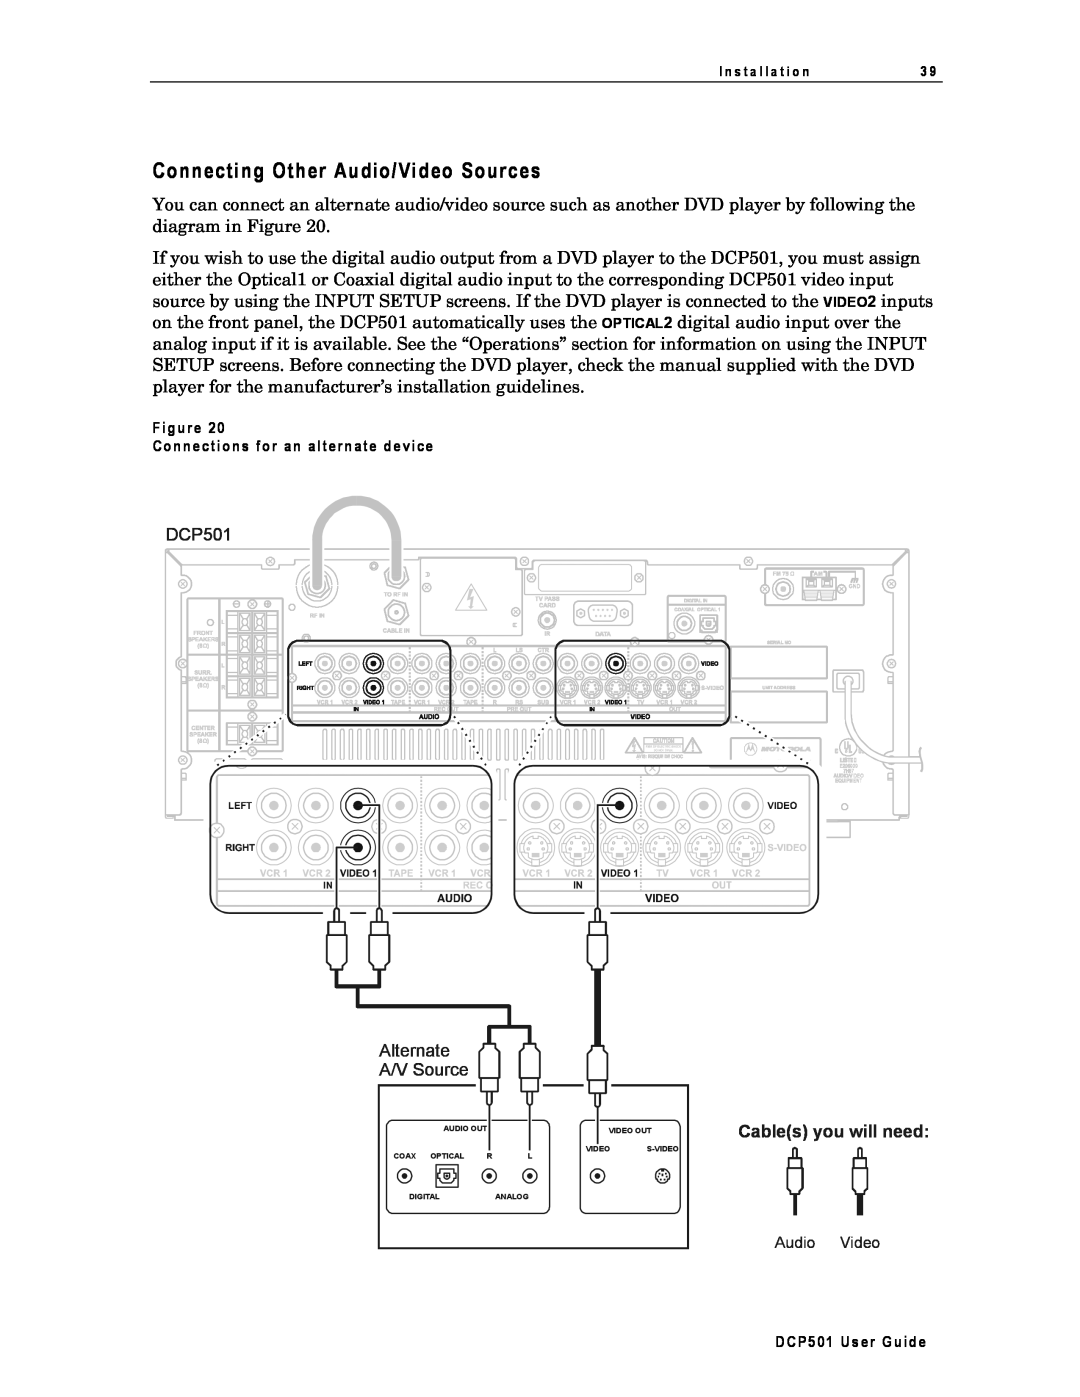 Motorola DCP501 manual Connecting Other Audio/Video Sources, Alternate A/V Source, Cables you will need 